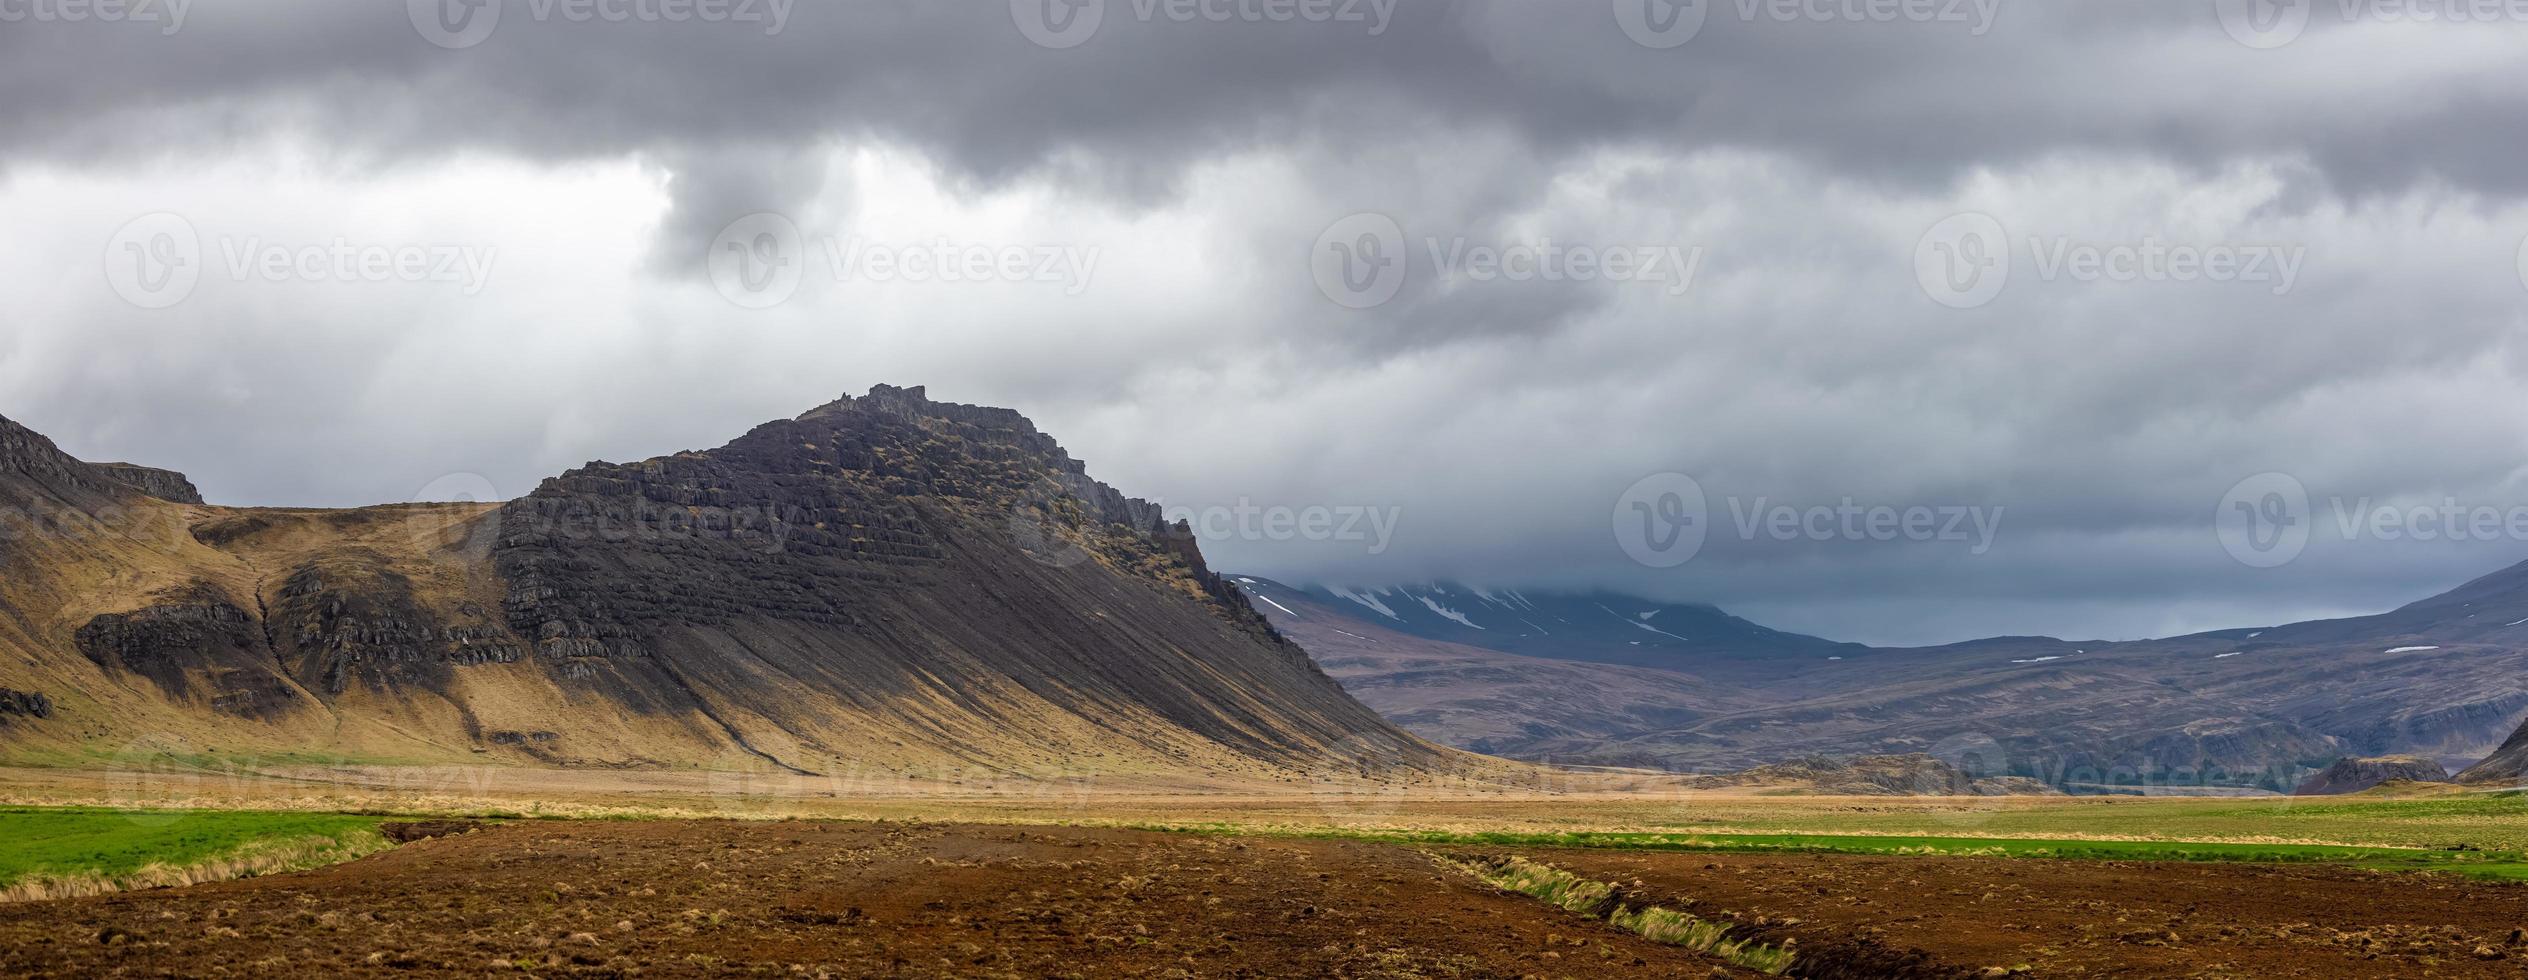 Panoramic view of mountain landscape with dark cloud cover in iceland countryside. photo